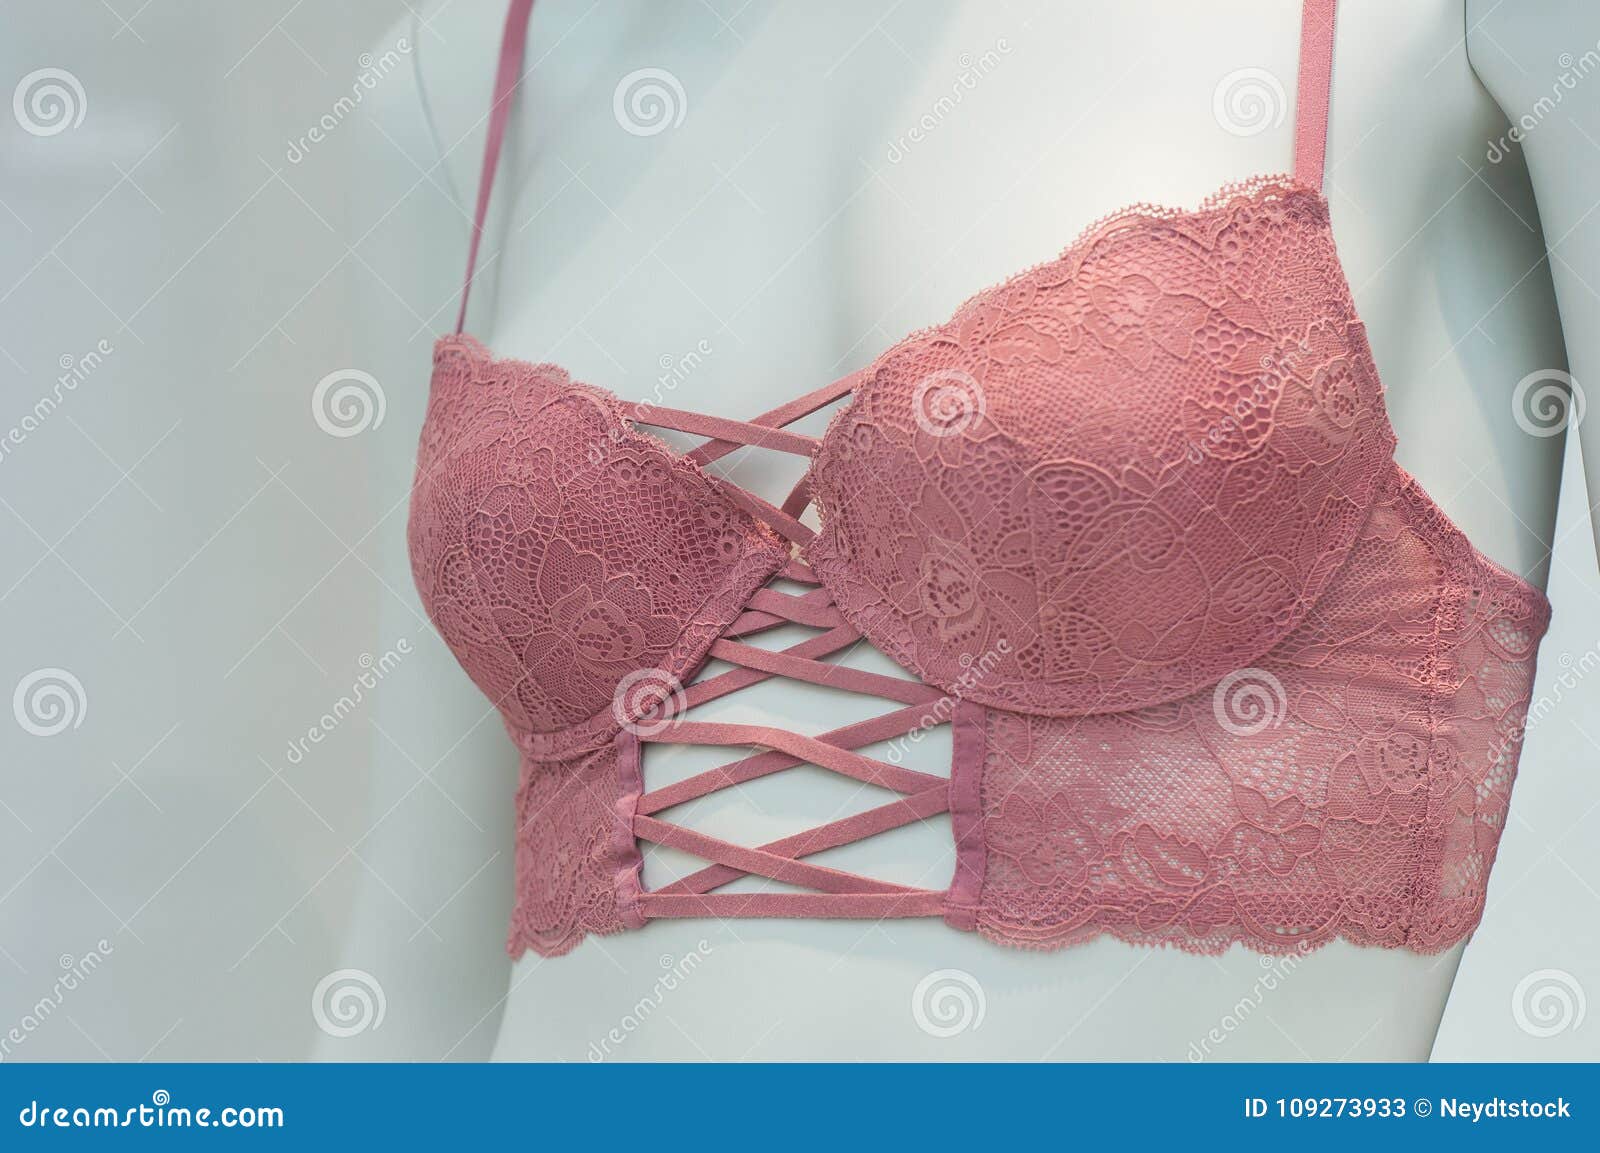 Perfect Slim Body Type. Sexy Blonde Girl In Underwear And No Bra Under The  Shirt Posing Near The Window In The Room. Stock Photo, Picture and Royalty  Free Image. Image 134793694.